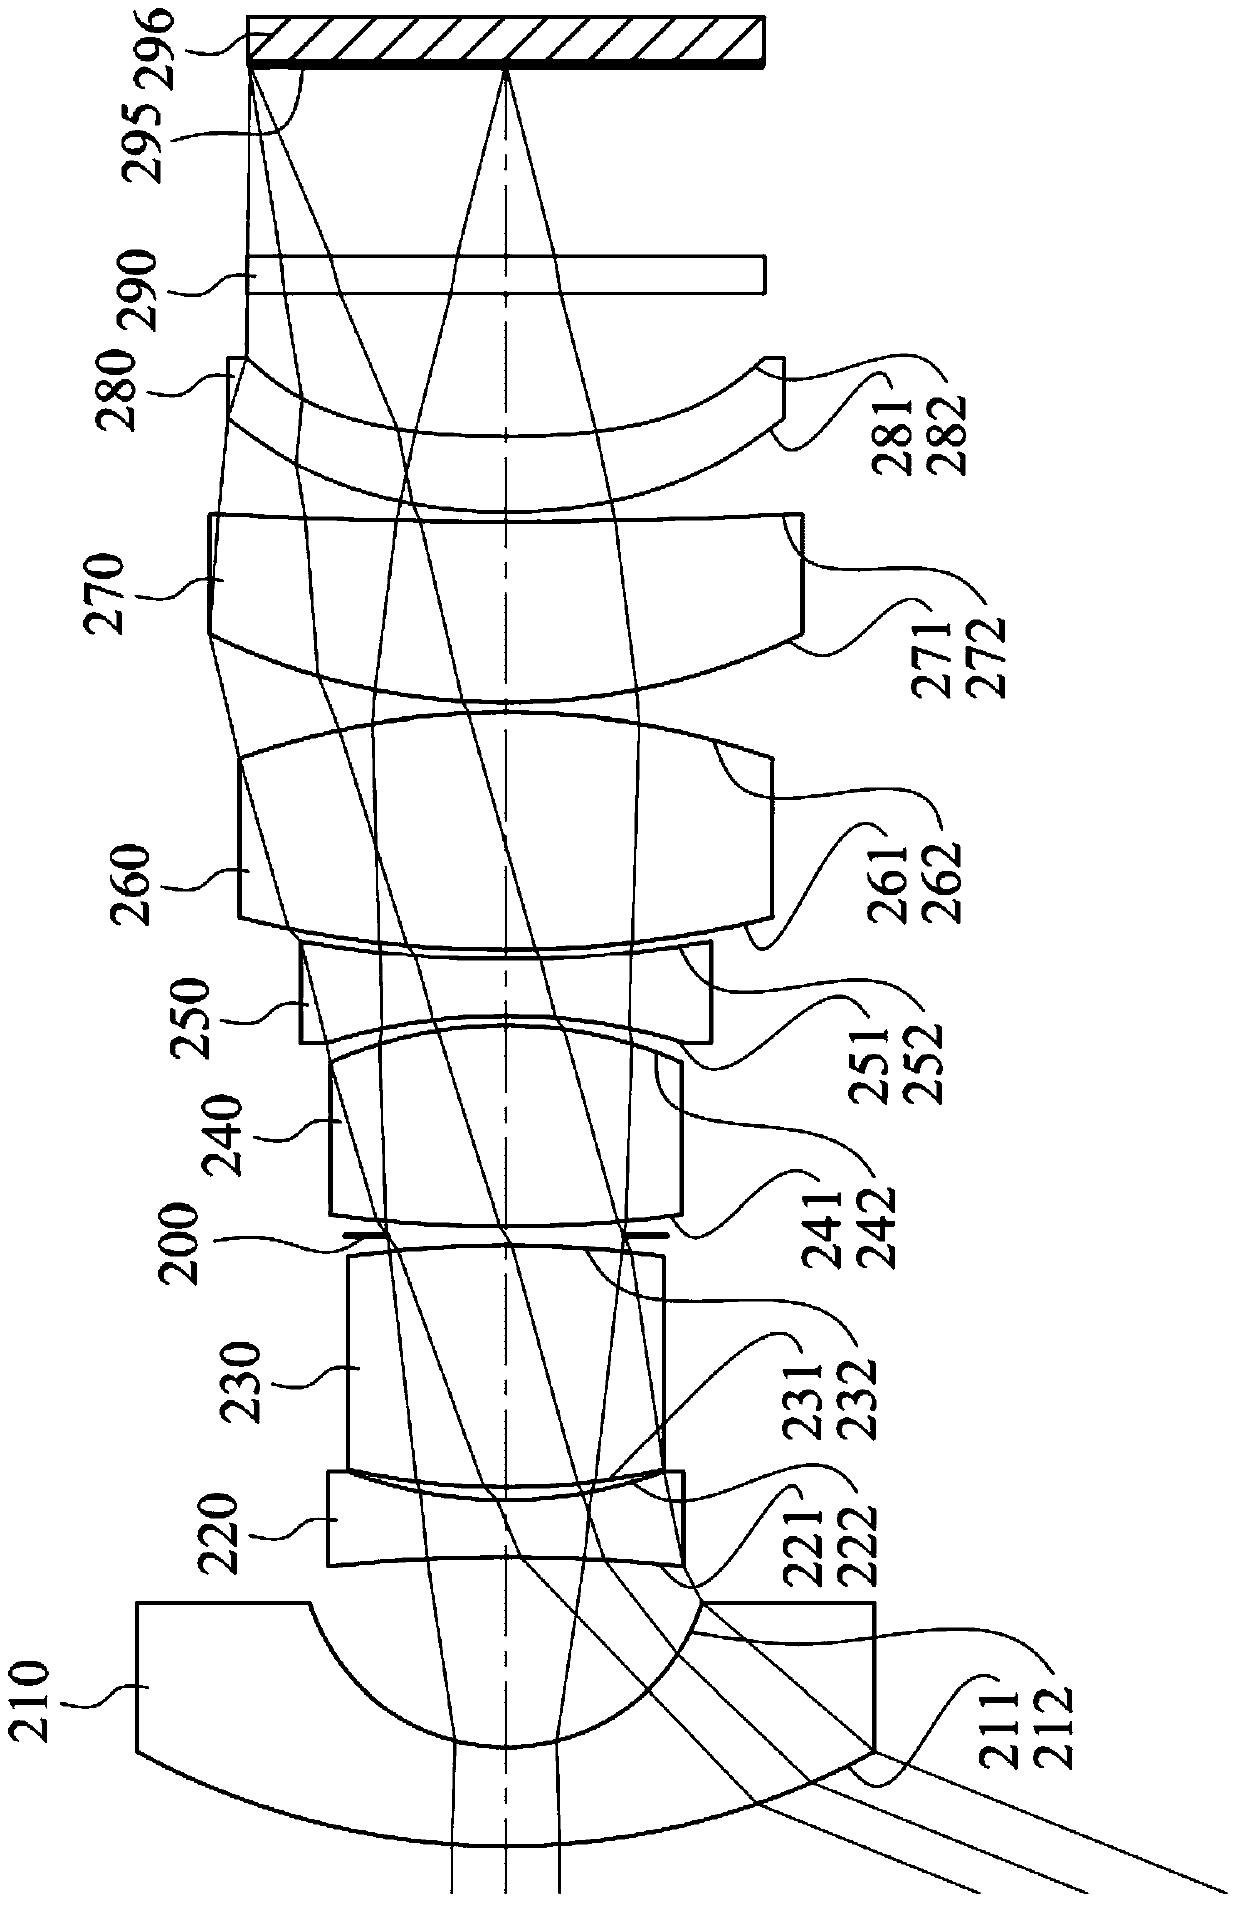 Optical lens group for imaging, imaging device and electronic device